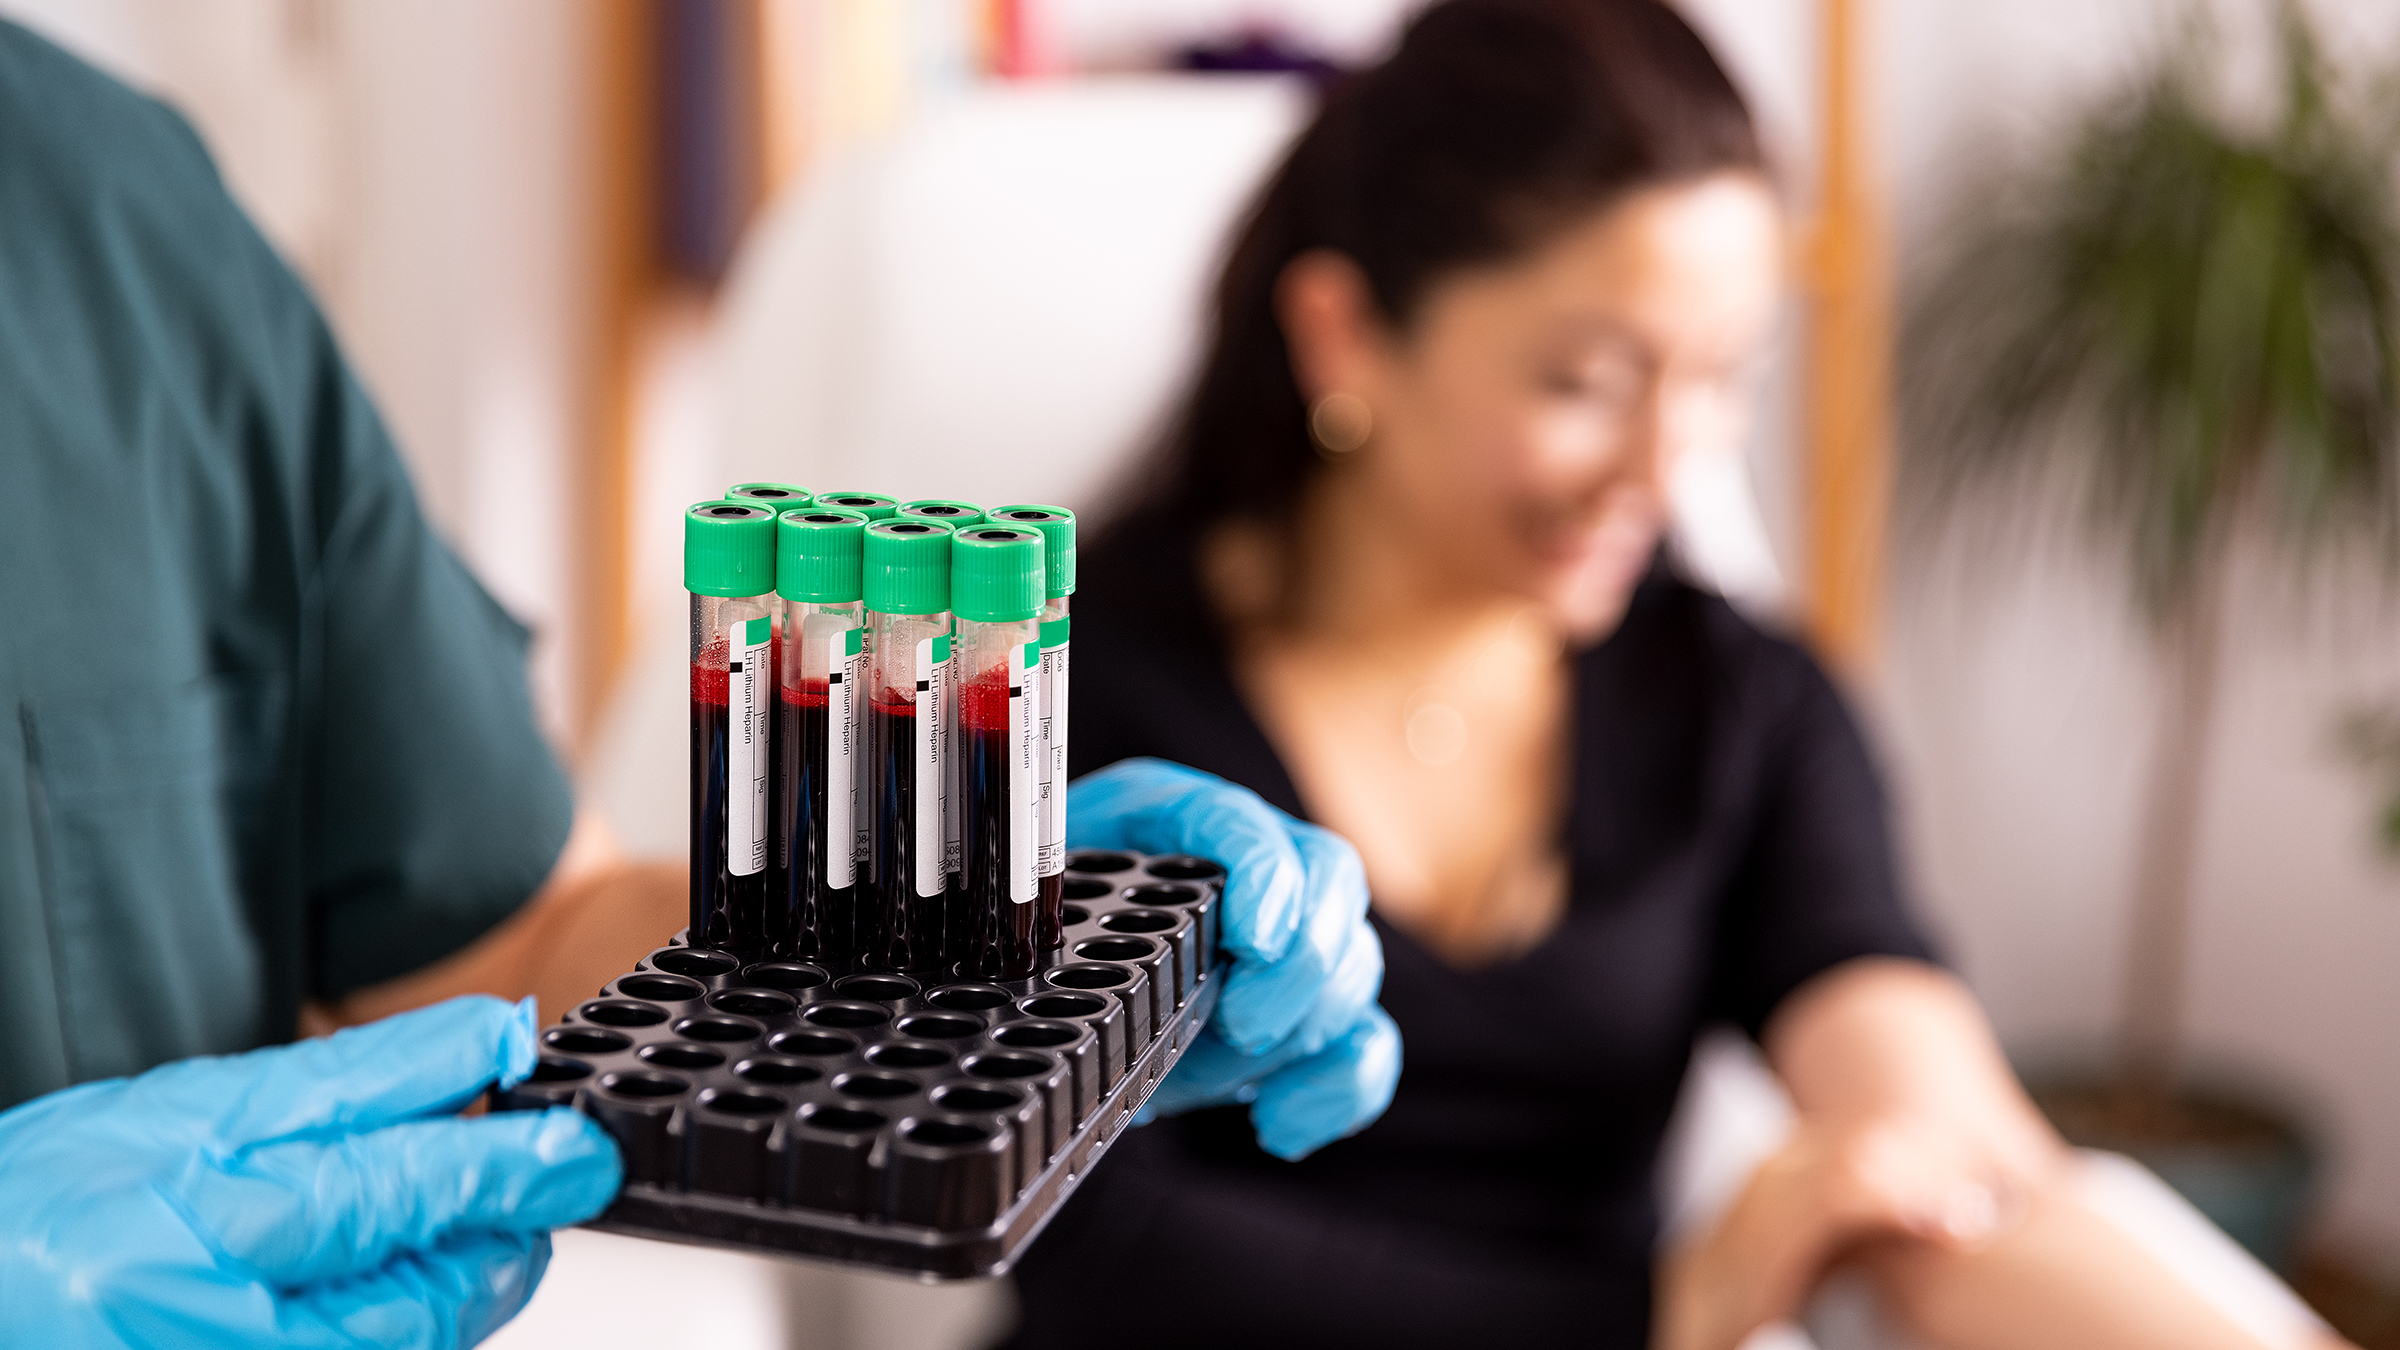 Blood tests: Types, routine testing, results, and more